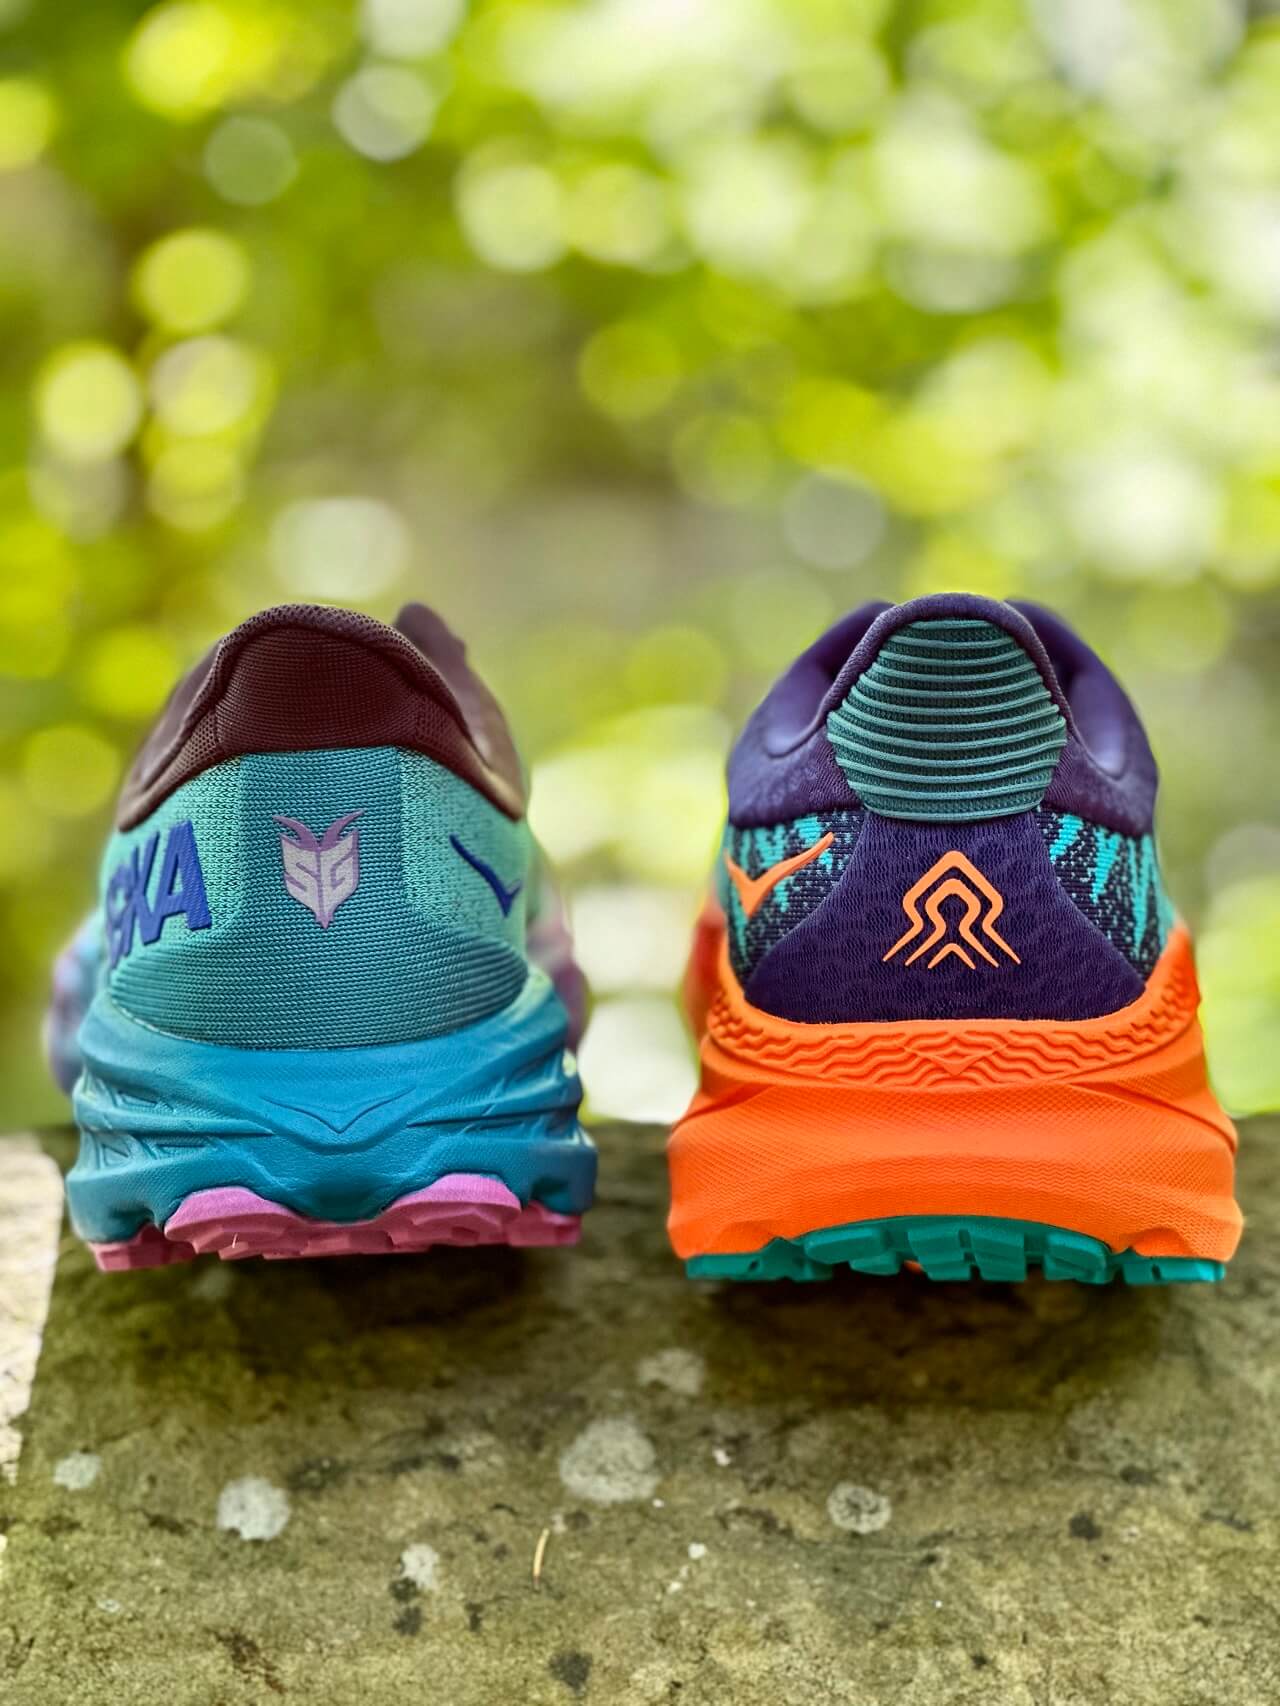 Heel of HOKA Challenger and HOKA Speedgoat trail running shoes shown side by side